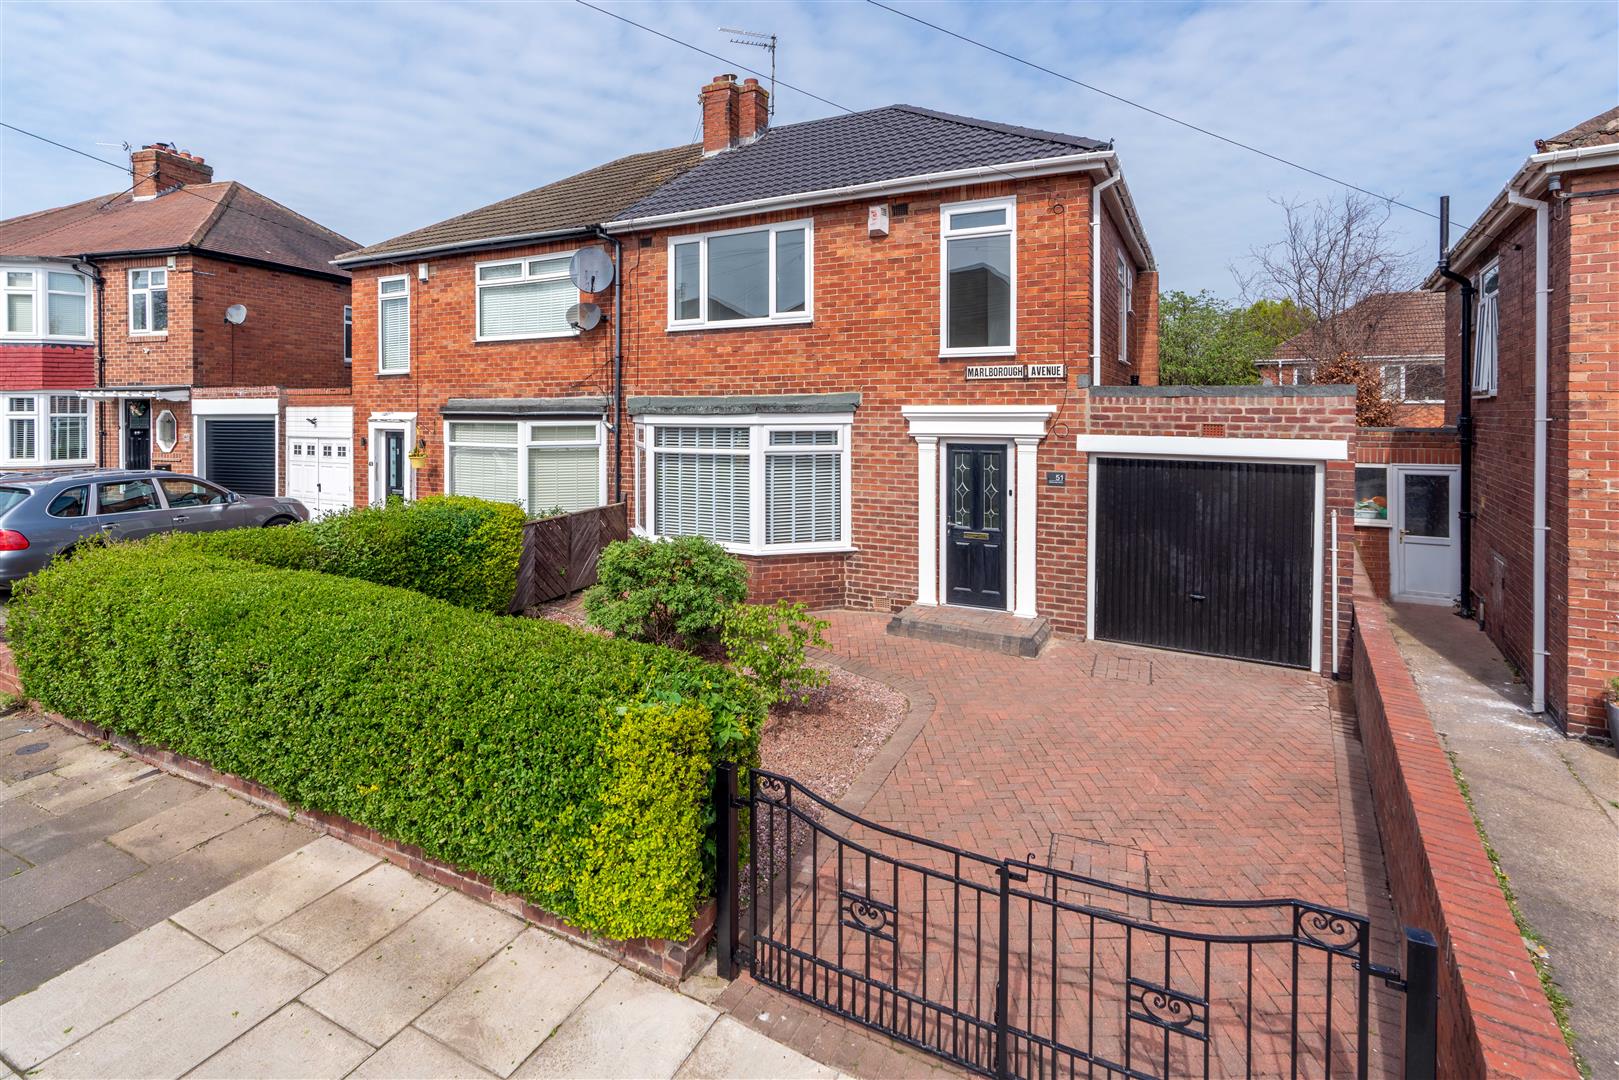 3 bed semi-detached house for sale in Marlborough Avenue, Gosforth  - Property Image 1